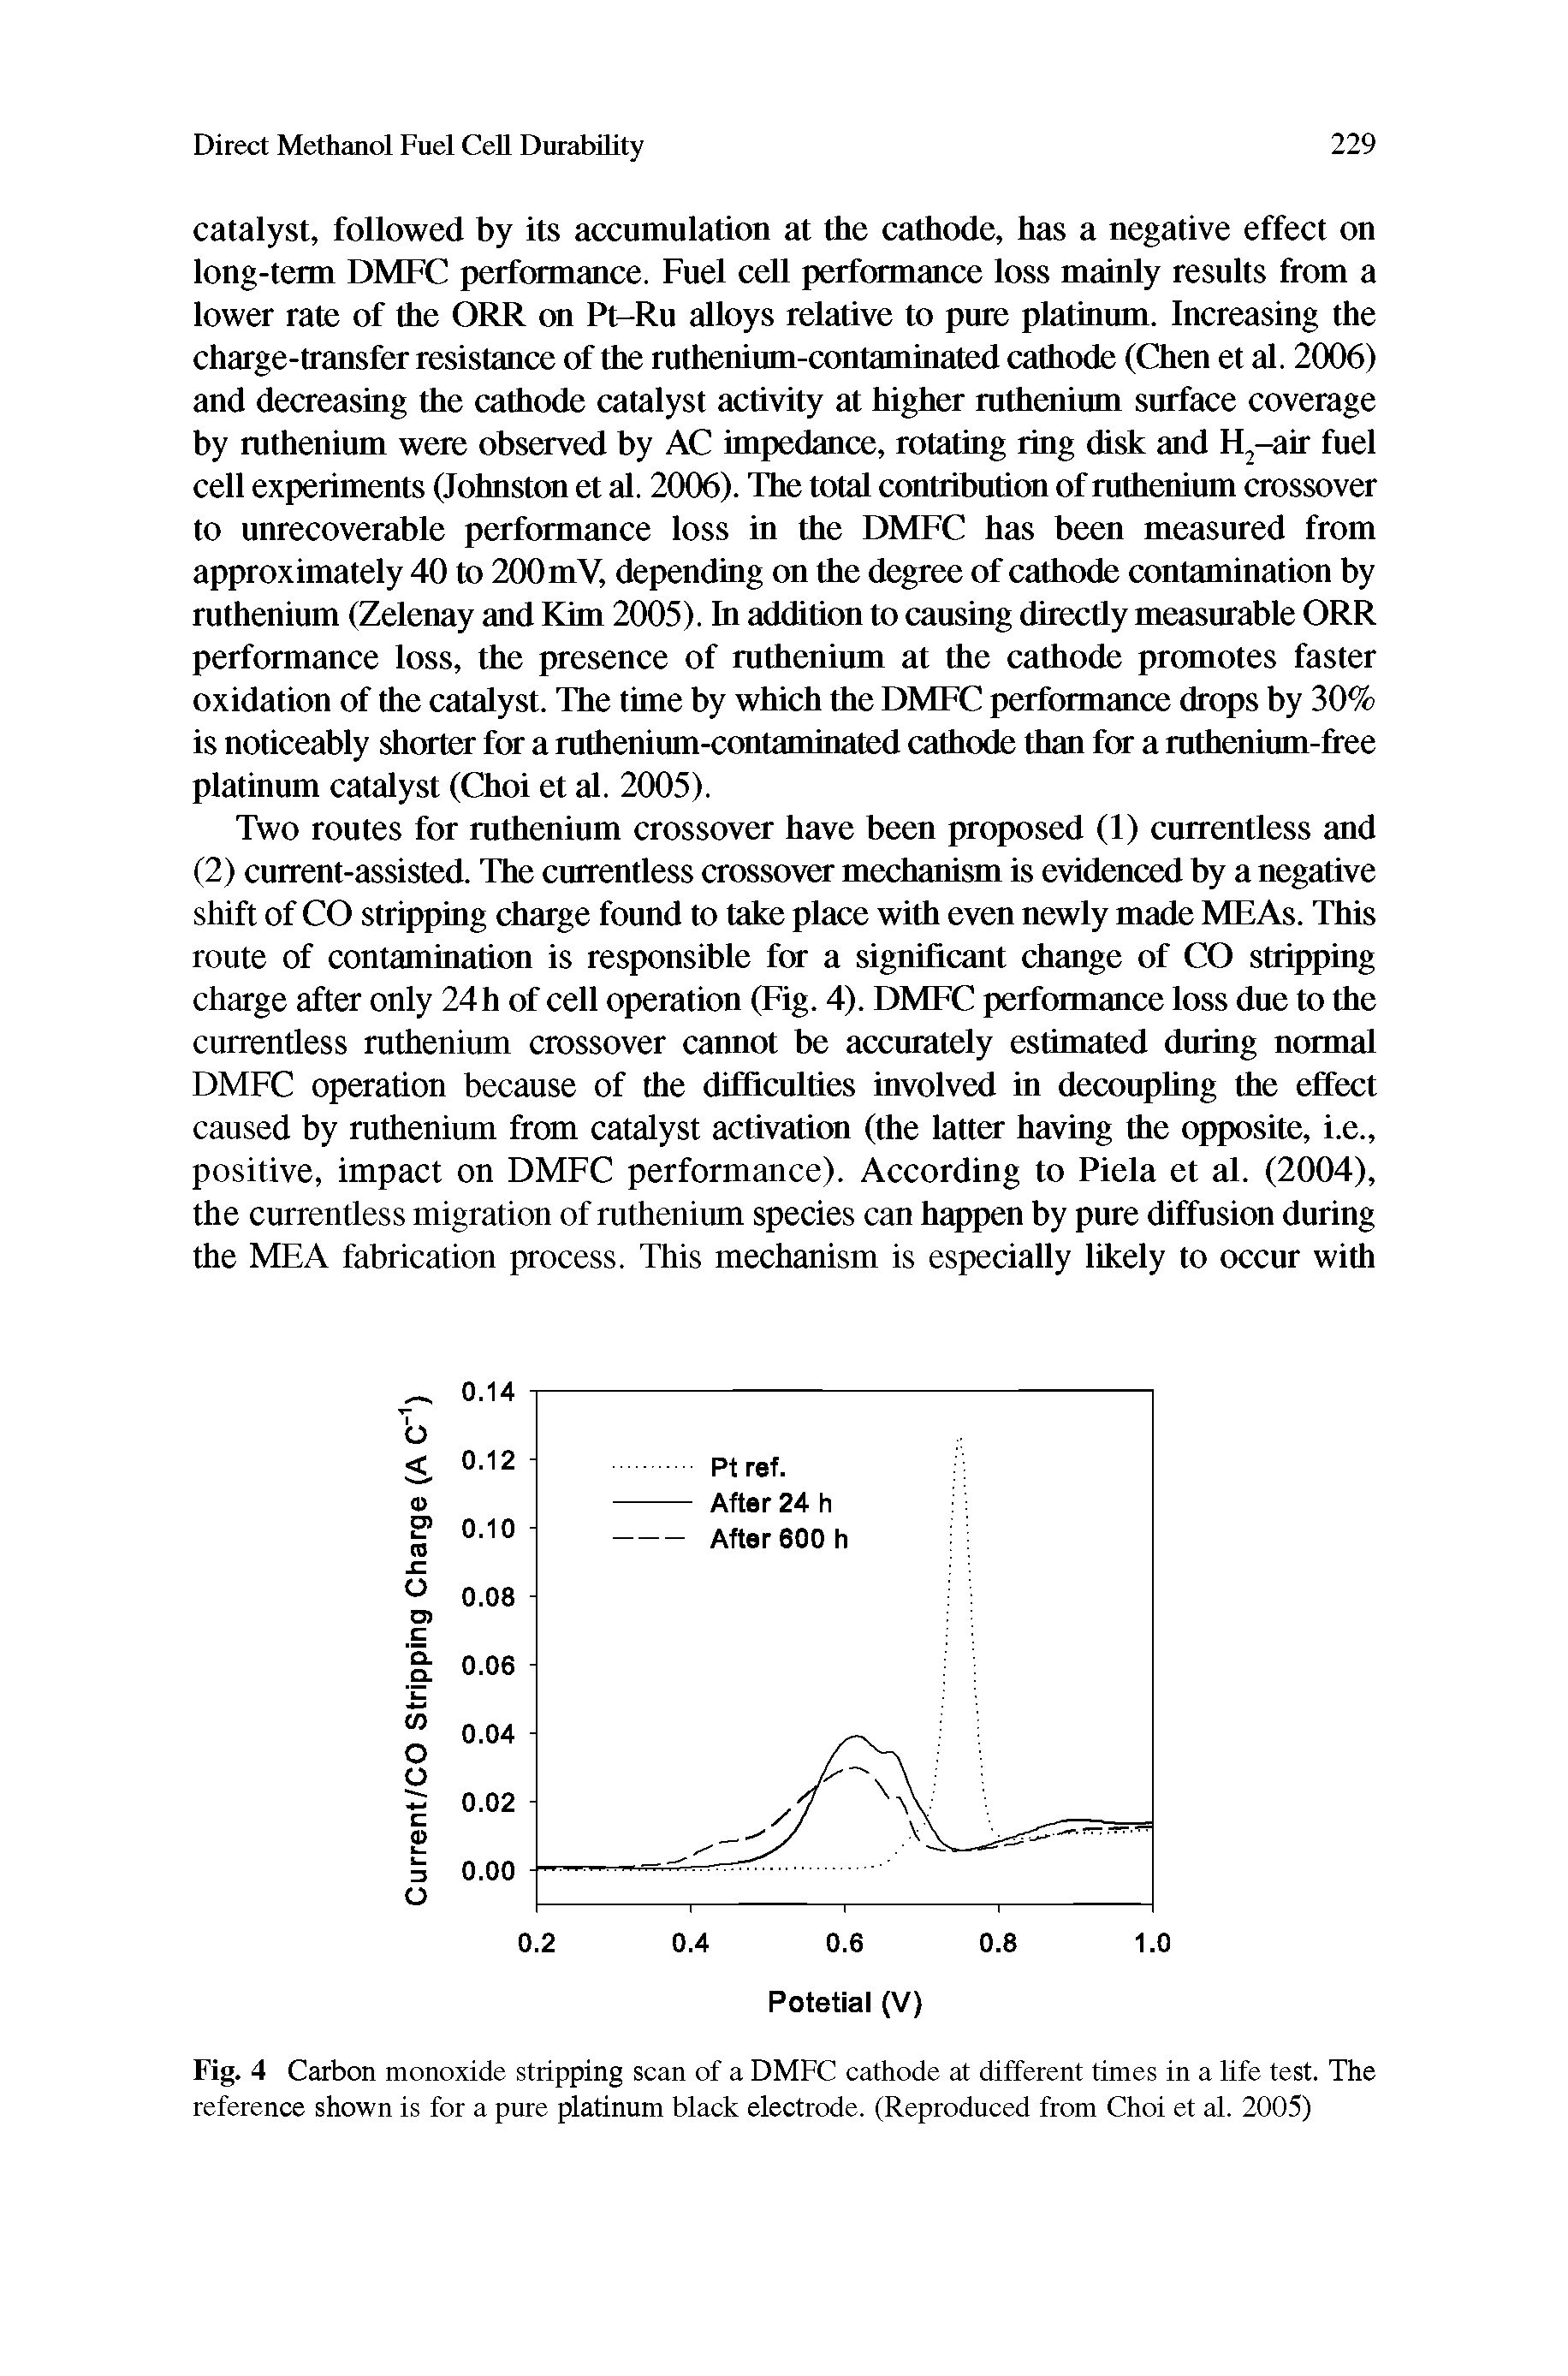 Fig. 4 Carbon monoxide stripping scan of a DMFC cathode at different times in a life test. The reference shown is for a pure platinum black electrode. (Reproduced from Choi et al. 2005)...